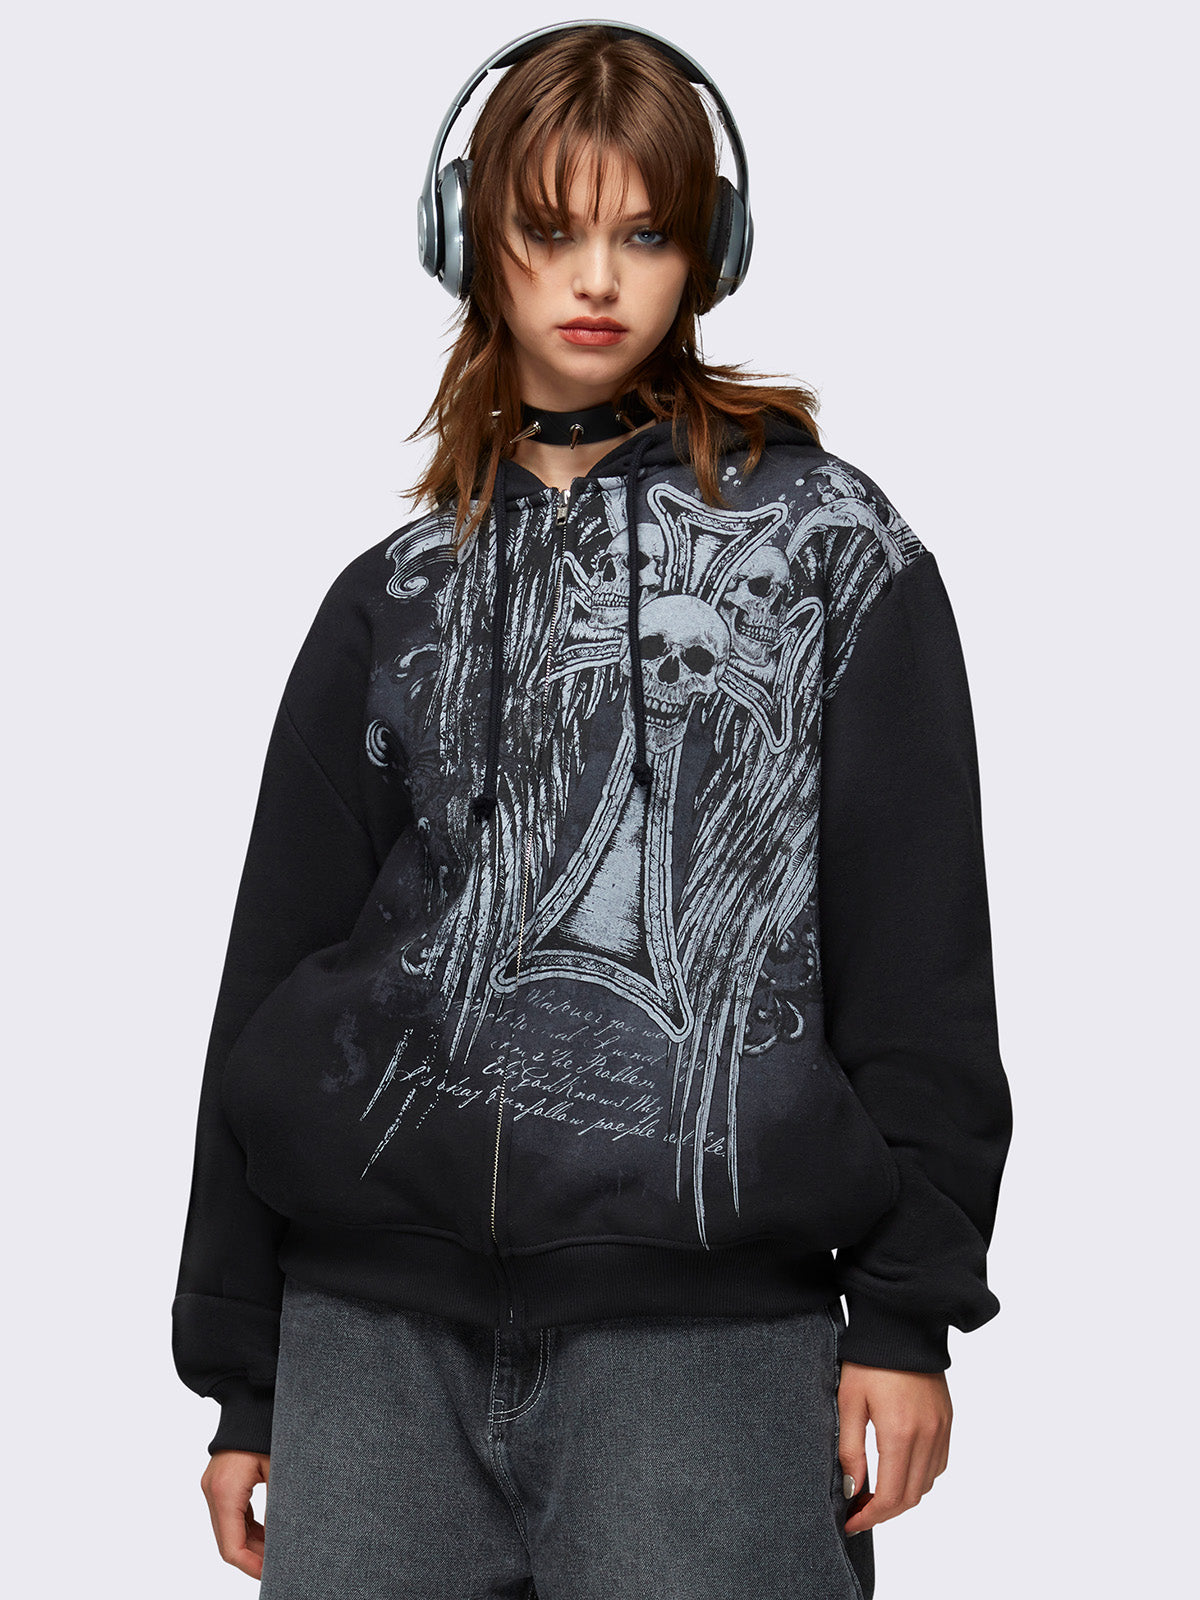 Oversized zip up hoodie in black with winged skull graphic print